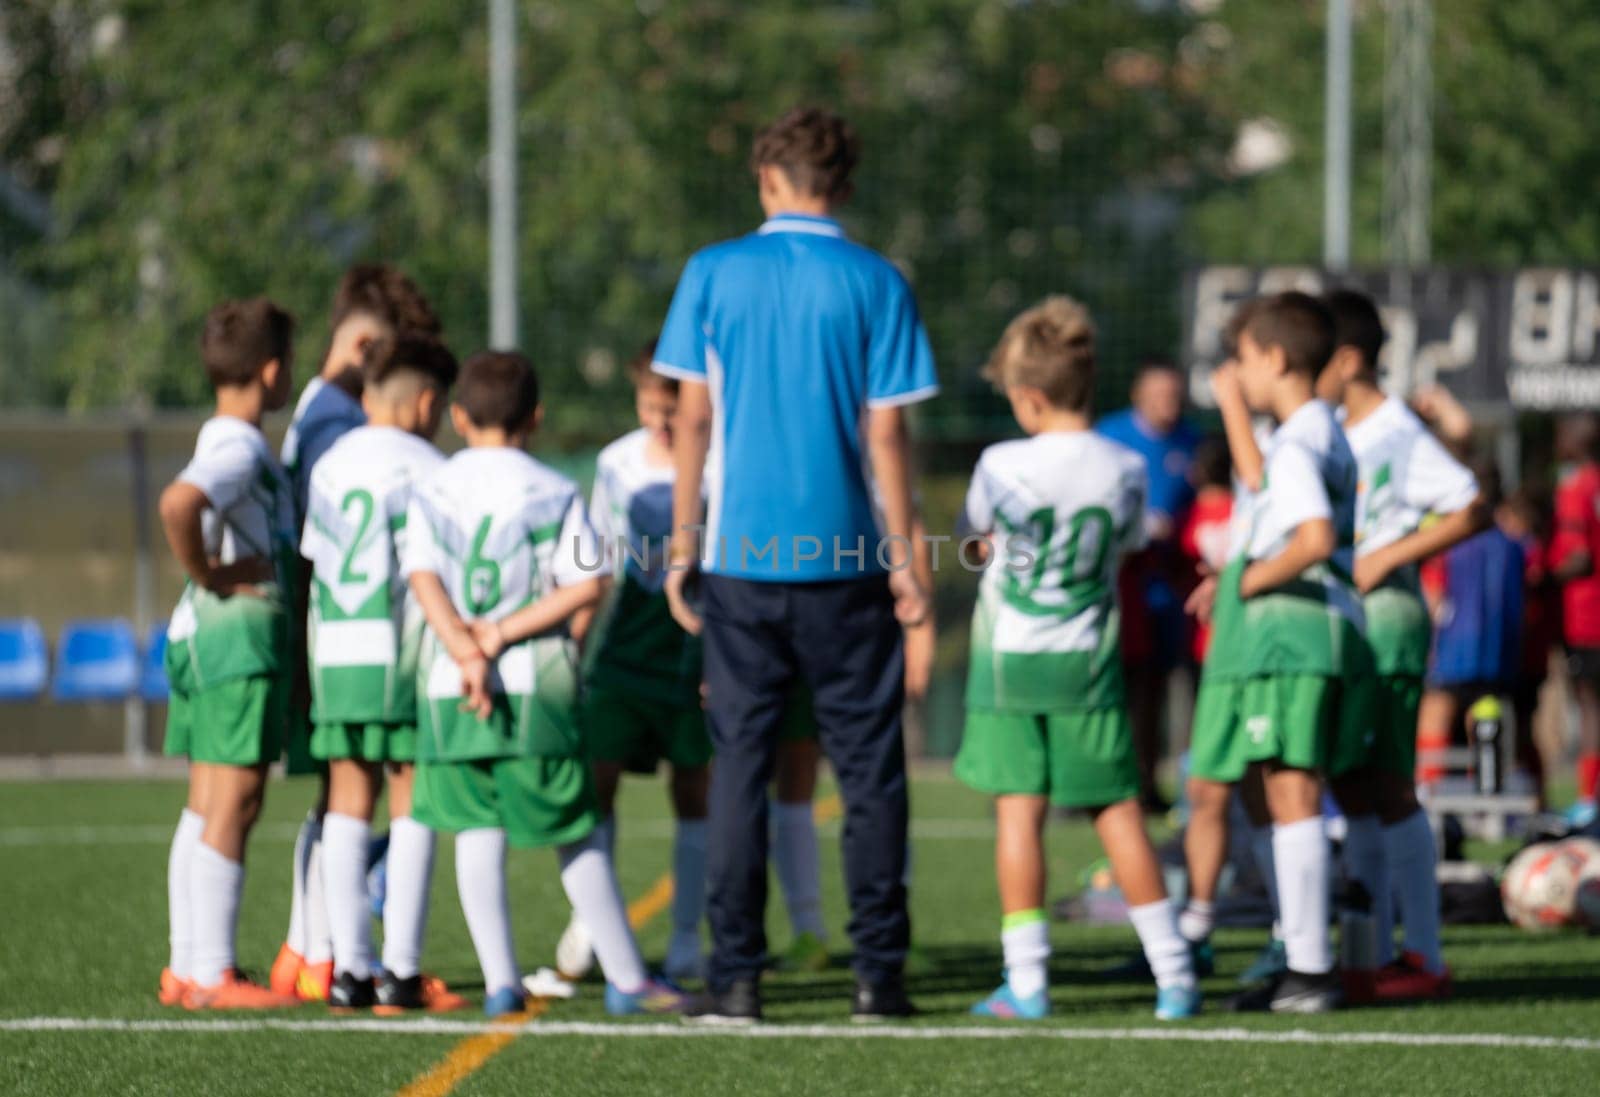 Coach giving instructions before the match to the soccer team of young kids. by papatonic